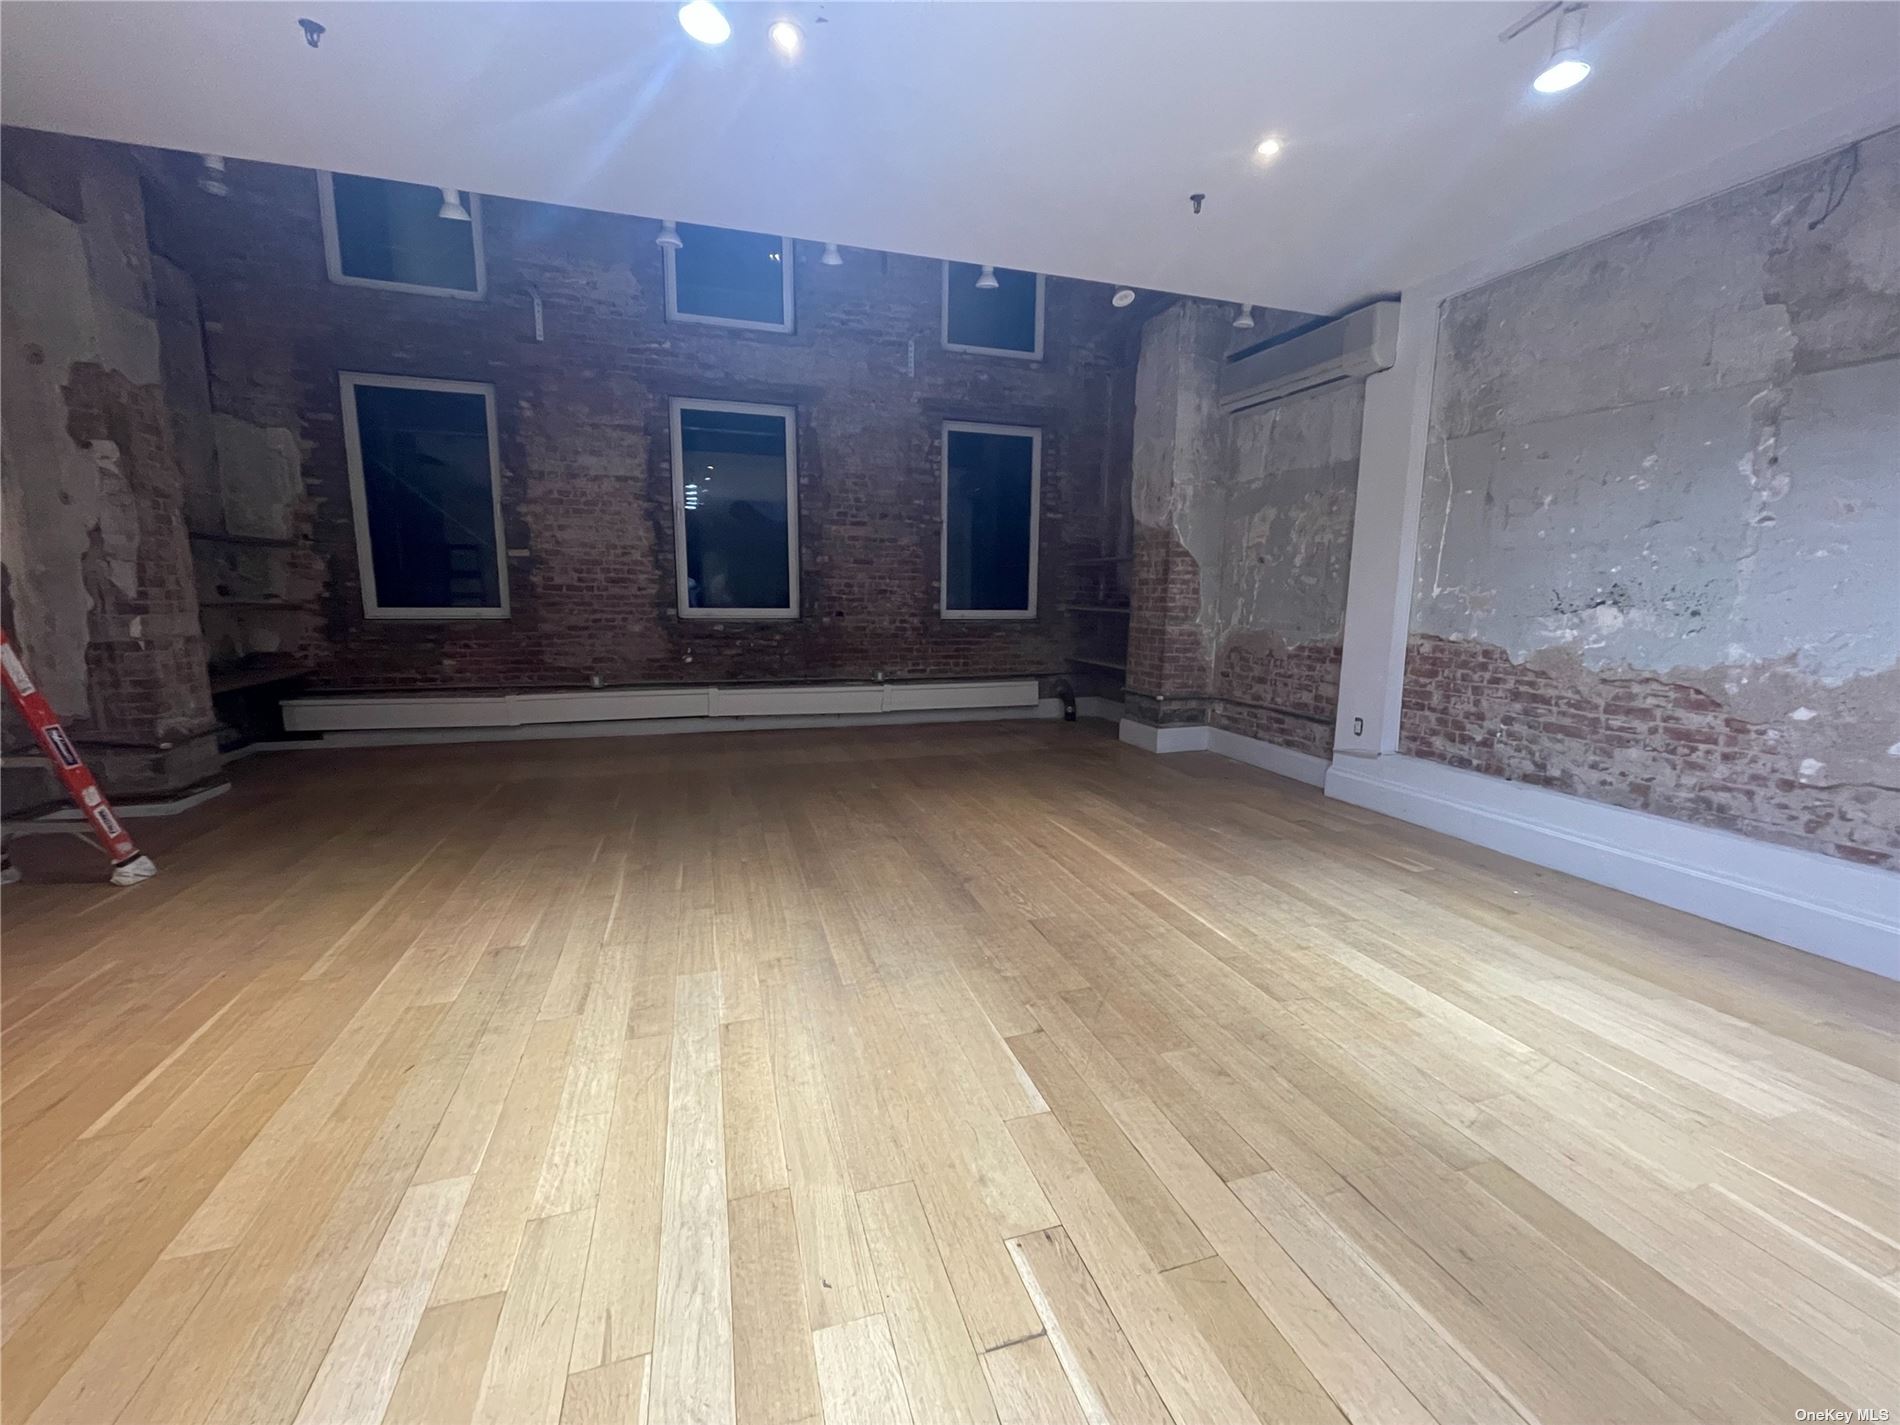 Commercial Lease in New York - Chambers  Manhattan, NY 10007